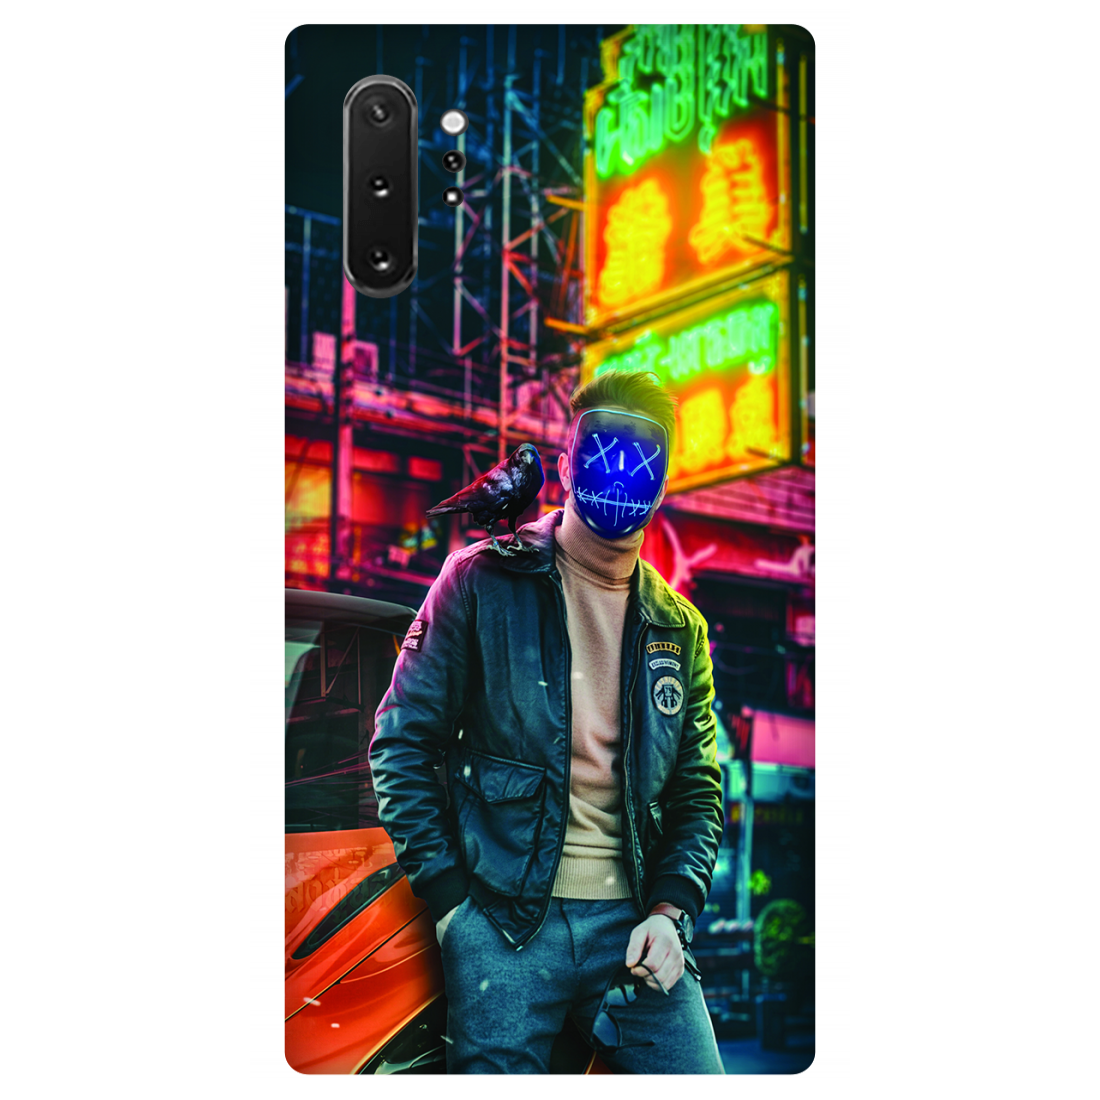 Neon guy Anonymous Samsung Galaxy Note 10 Plus